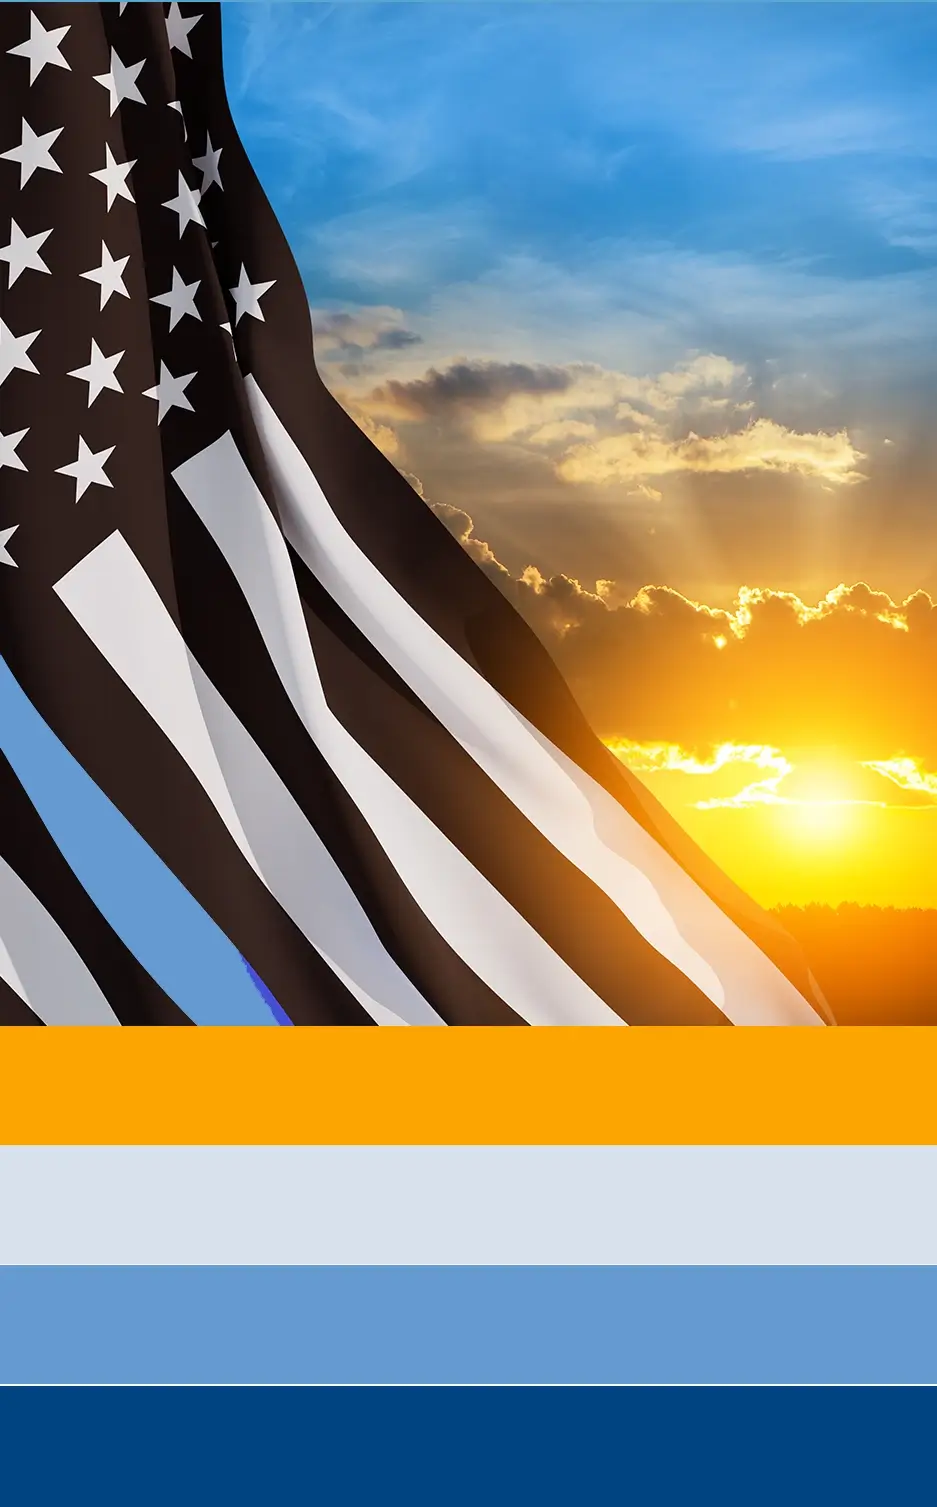 American flag featuring black stripes alongside one blue stripe symbolizes first responders to illustrate our mental health clinic works well with first responders